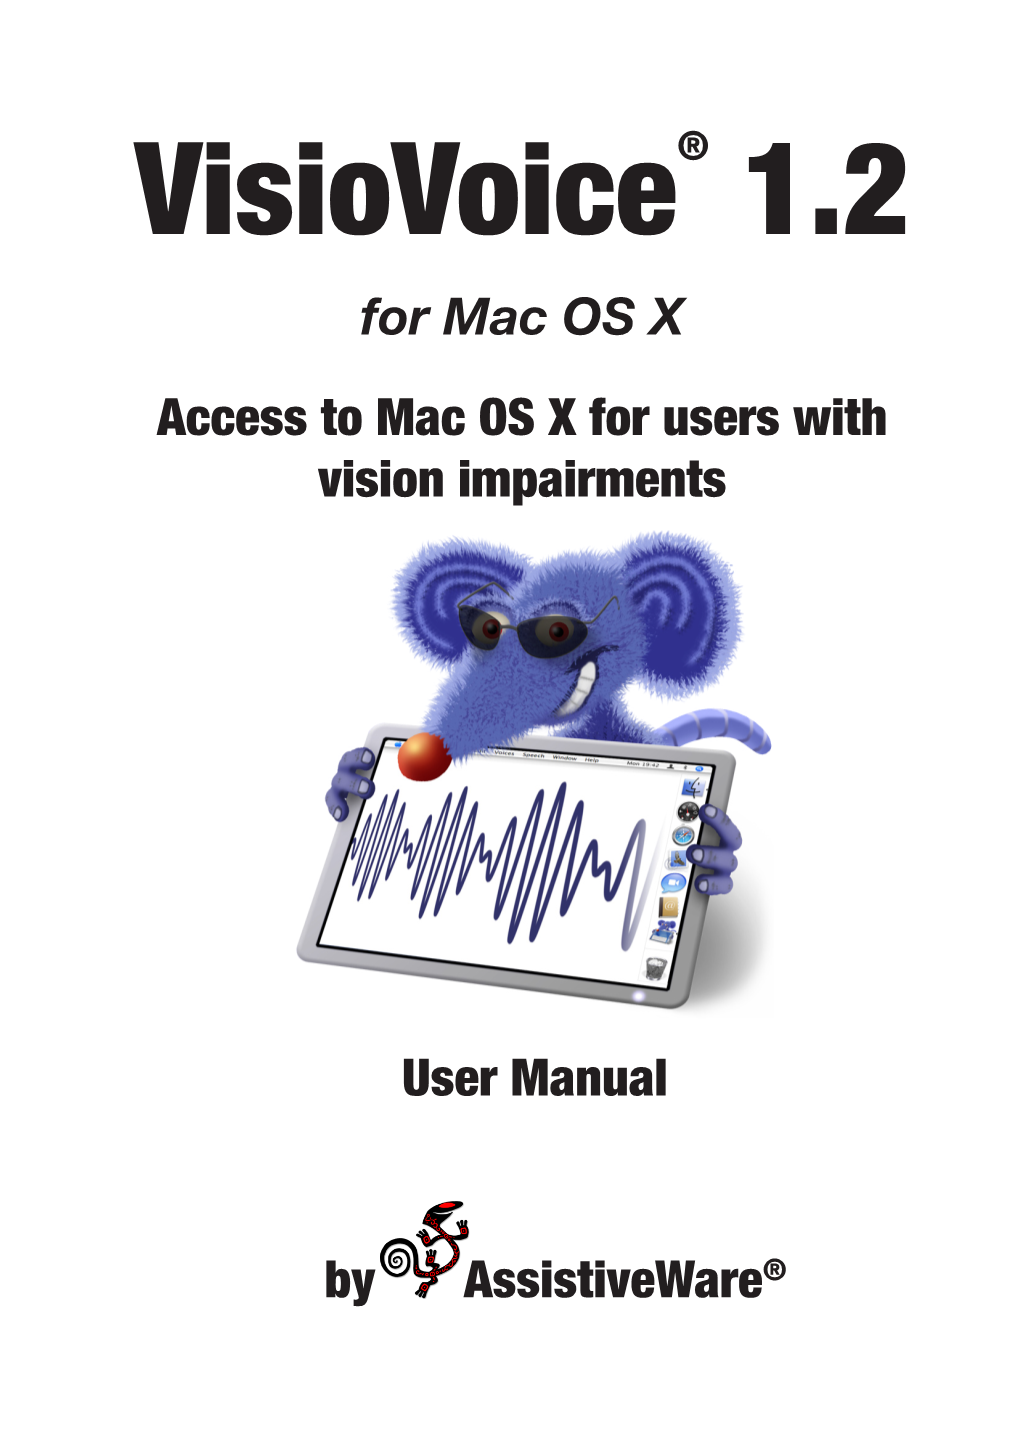 For Mac OS X Access to Mac OS X for Users with Vision Impairments